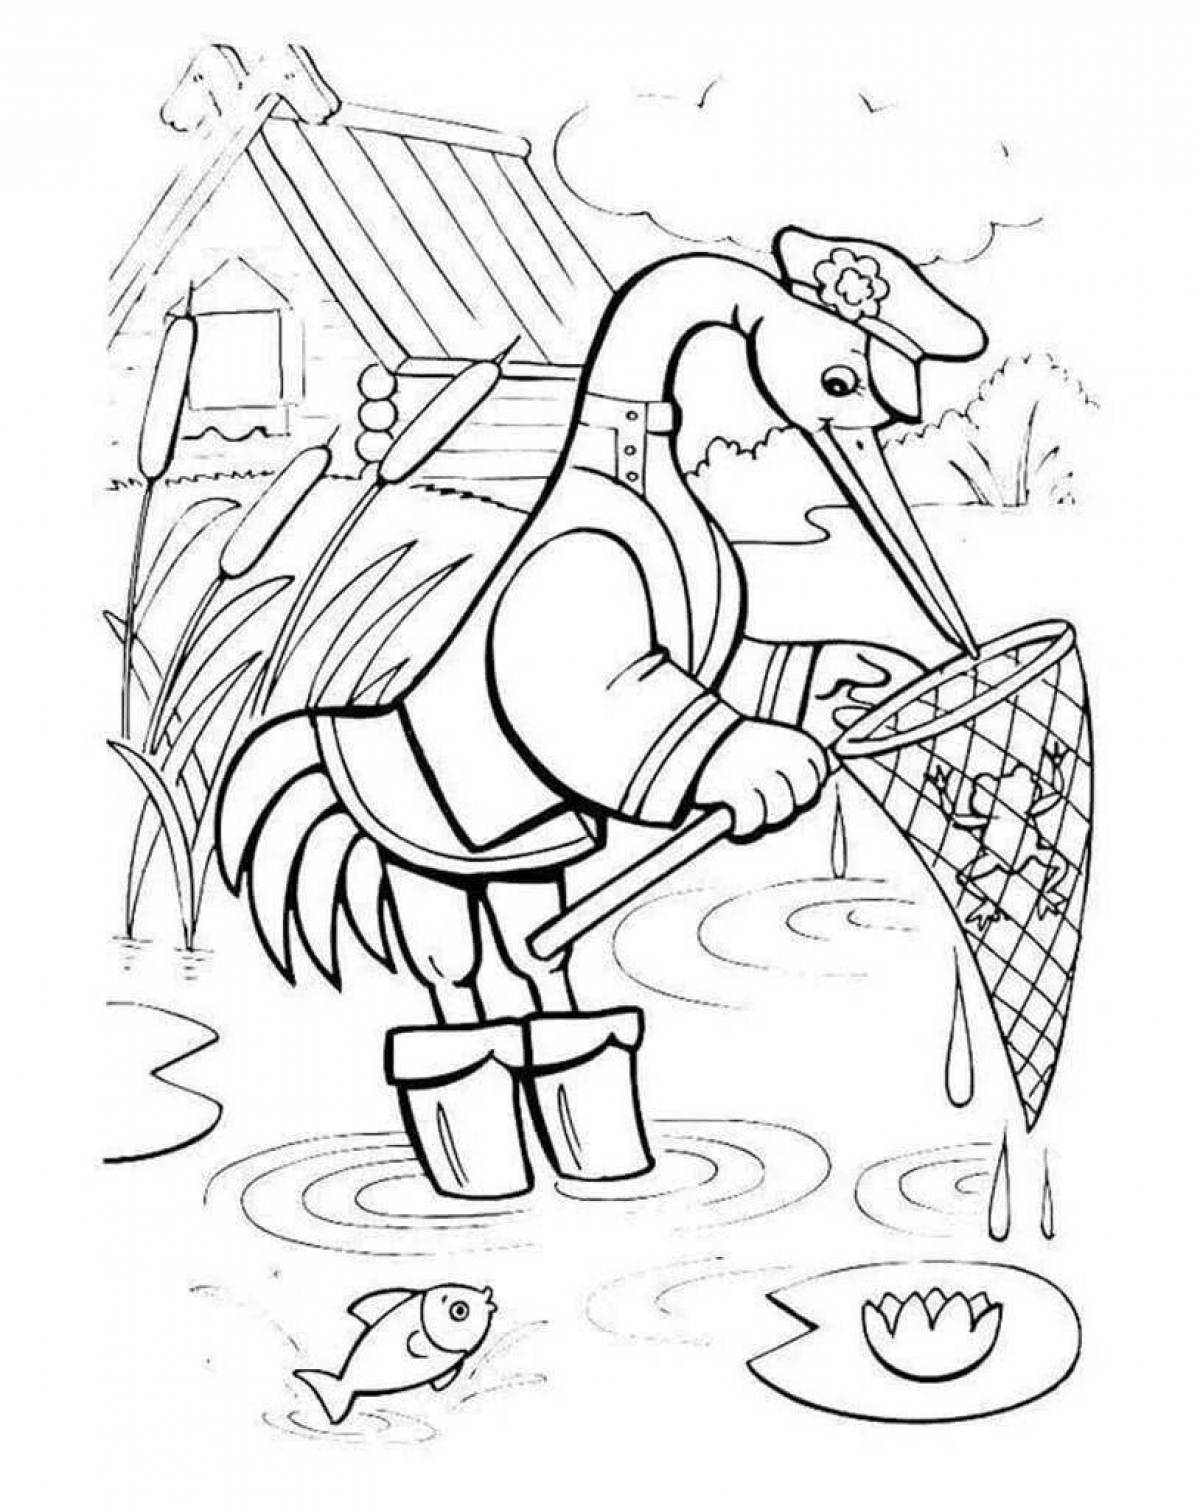 Coloring page playful fox and jug